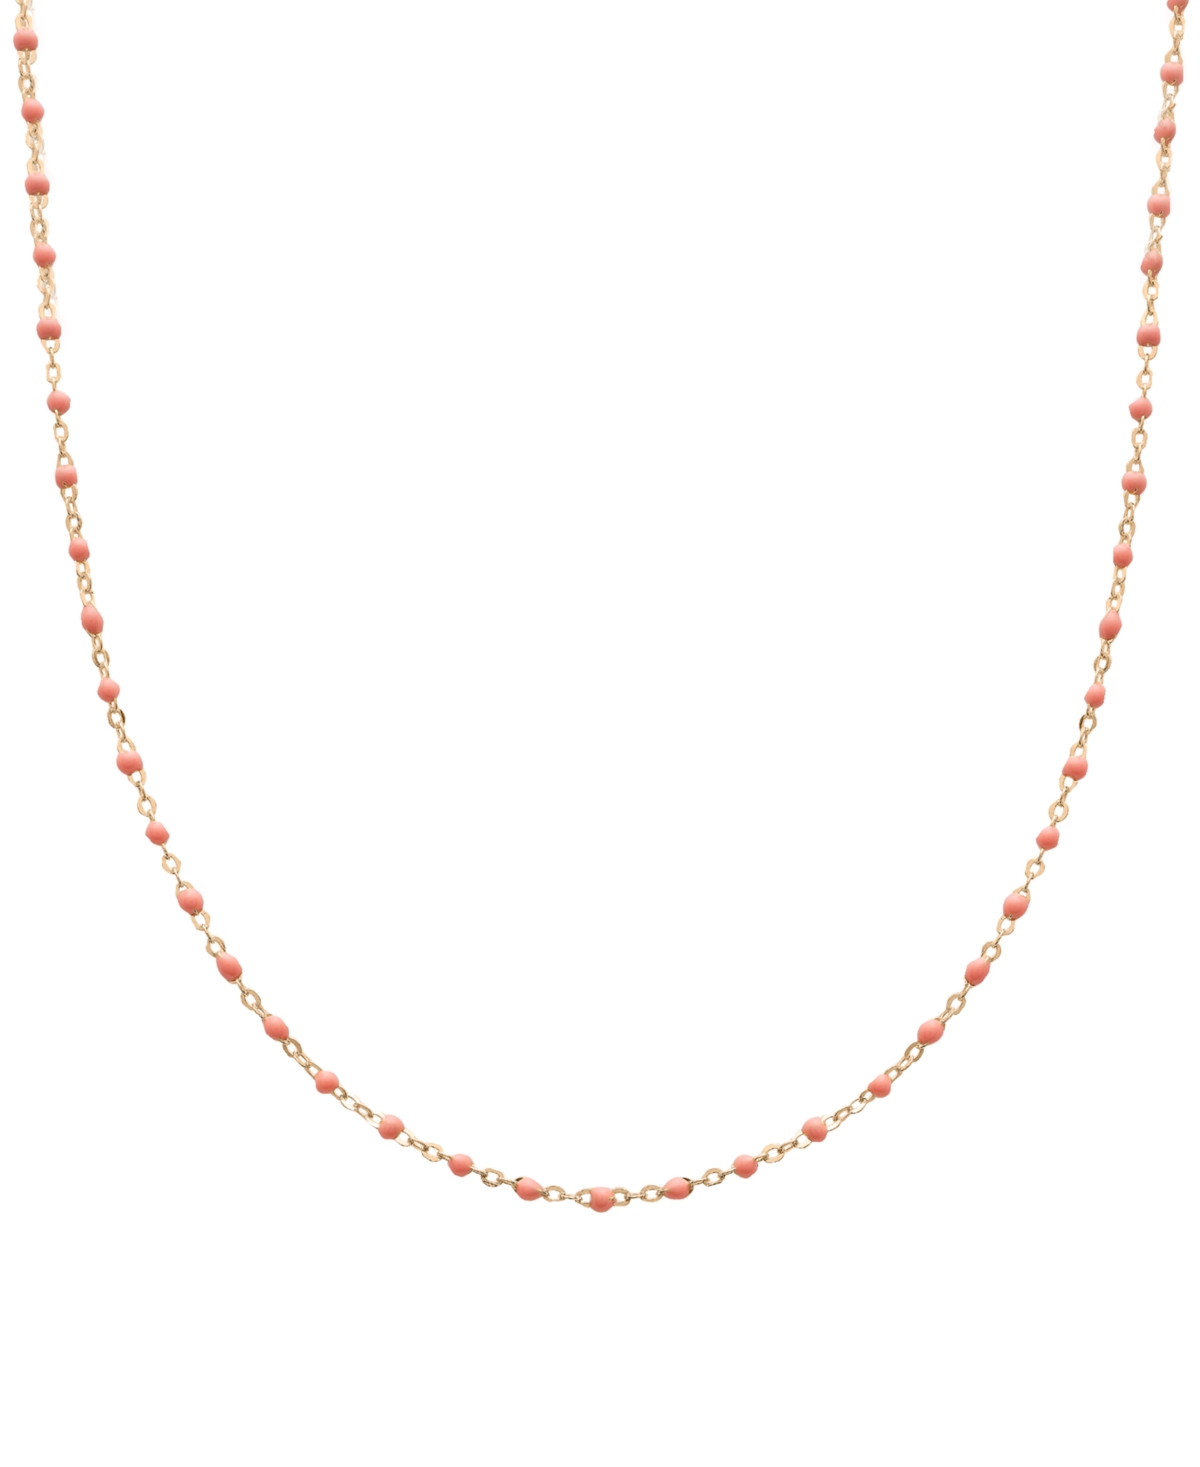 Giani Bernini Enamel Bead Collar Necklace, 16" + 2" Extender, Created For Macy's In Pink